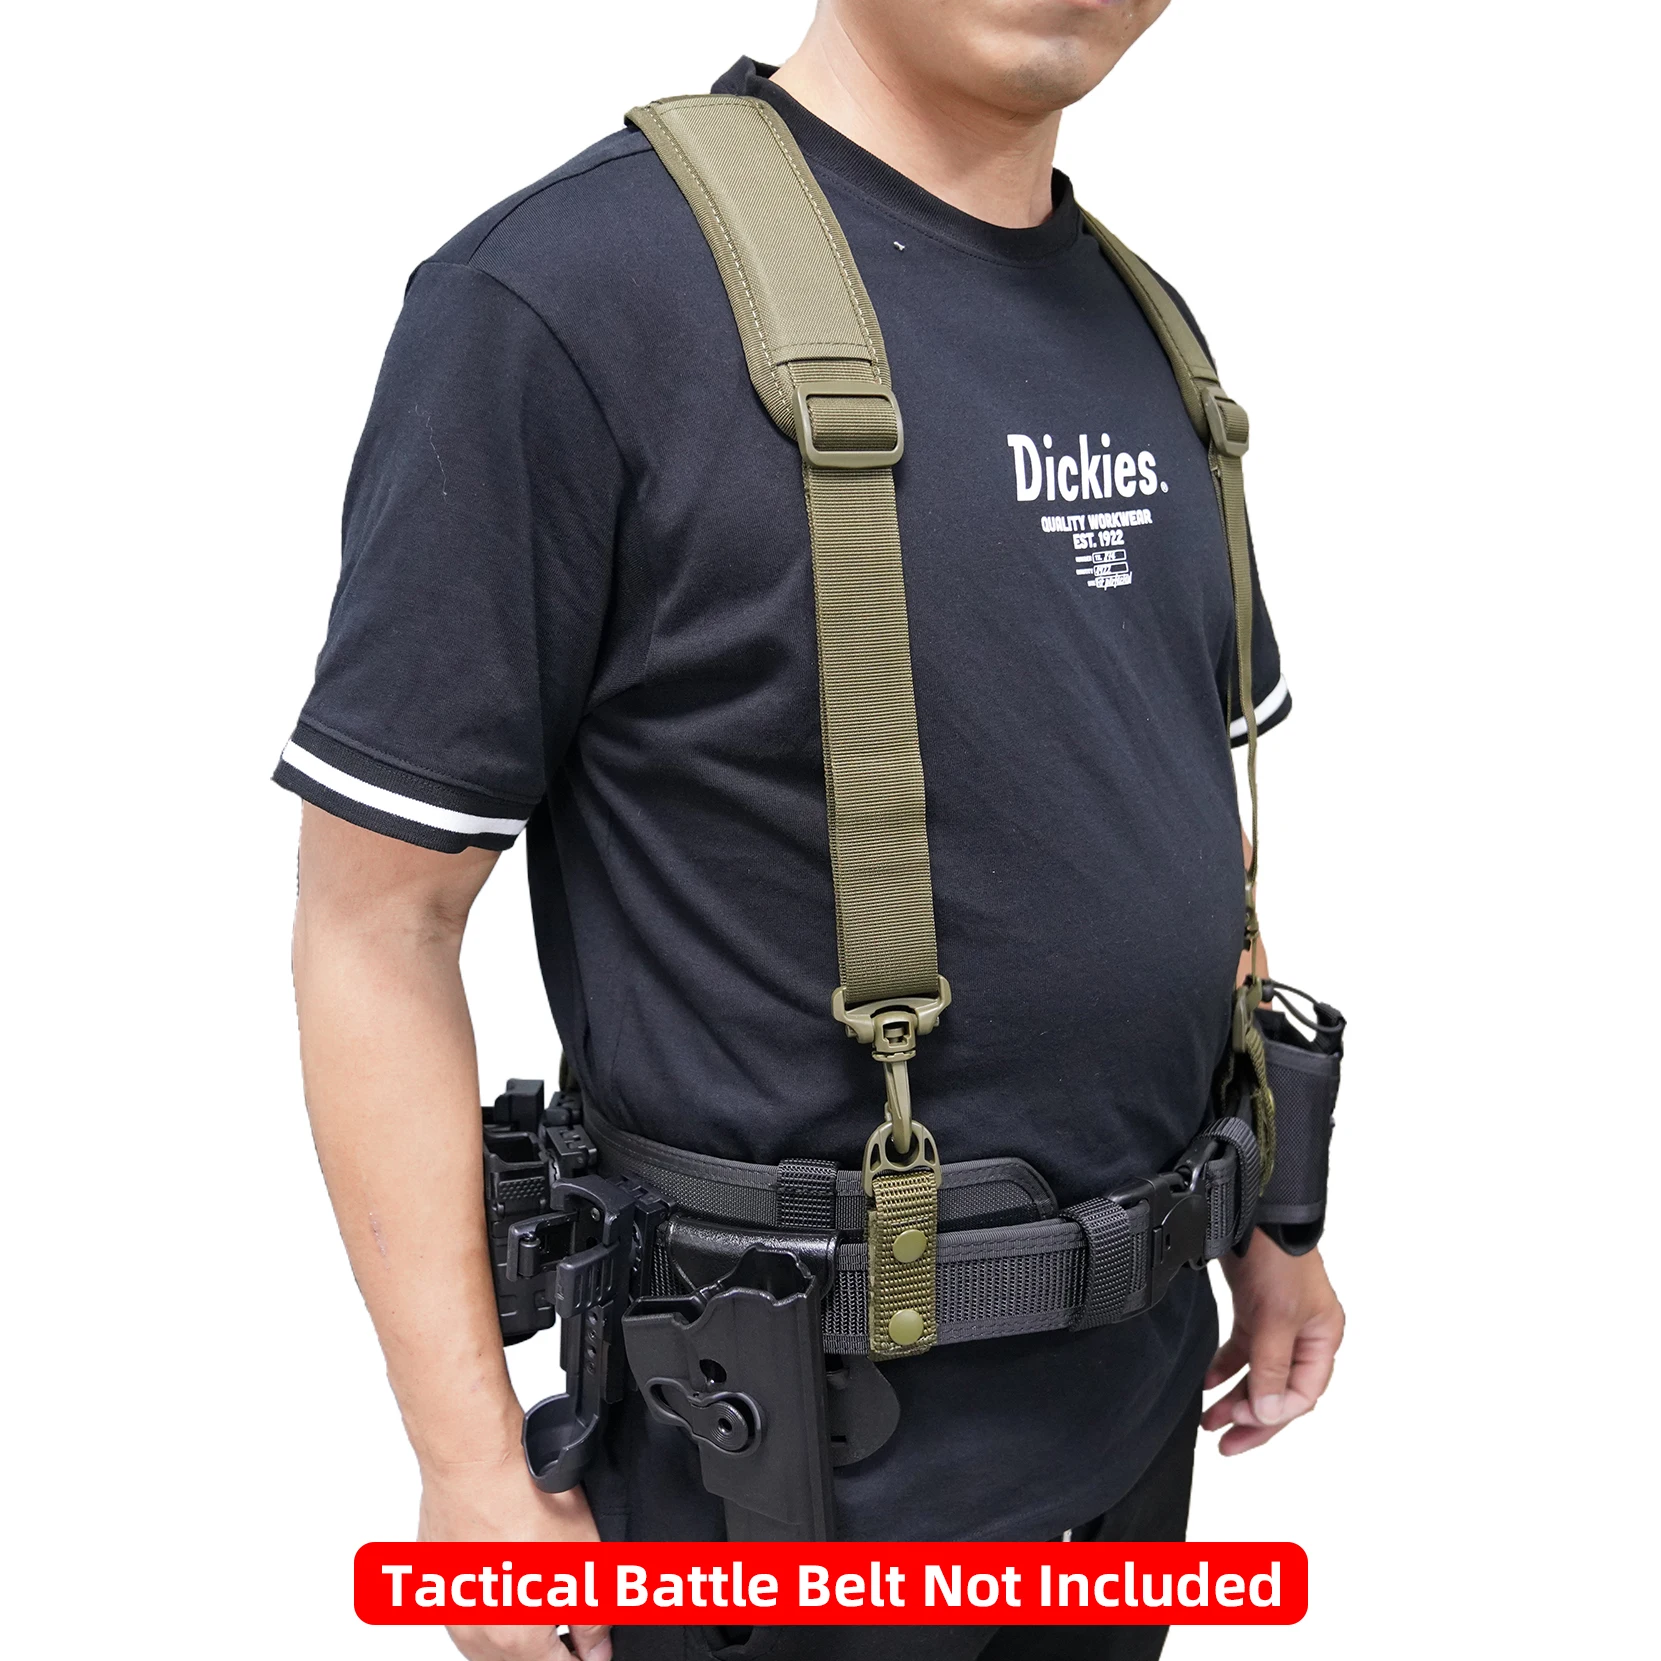 Tactical Suspenders Police Suspenders for Duty Belt with Durable